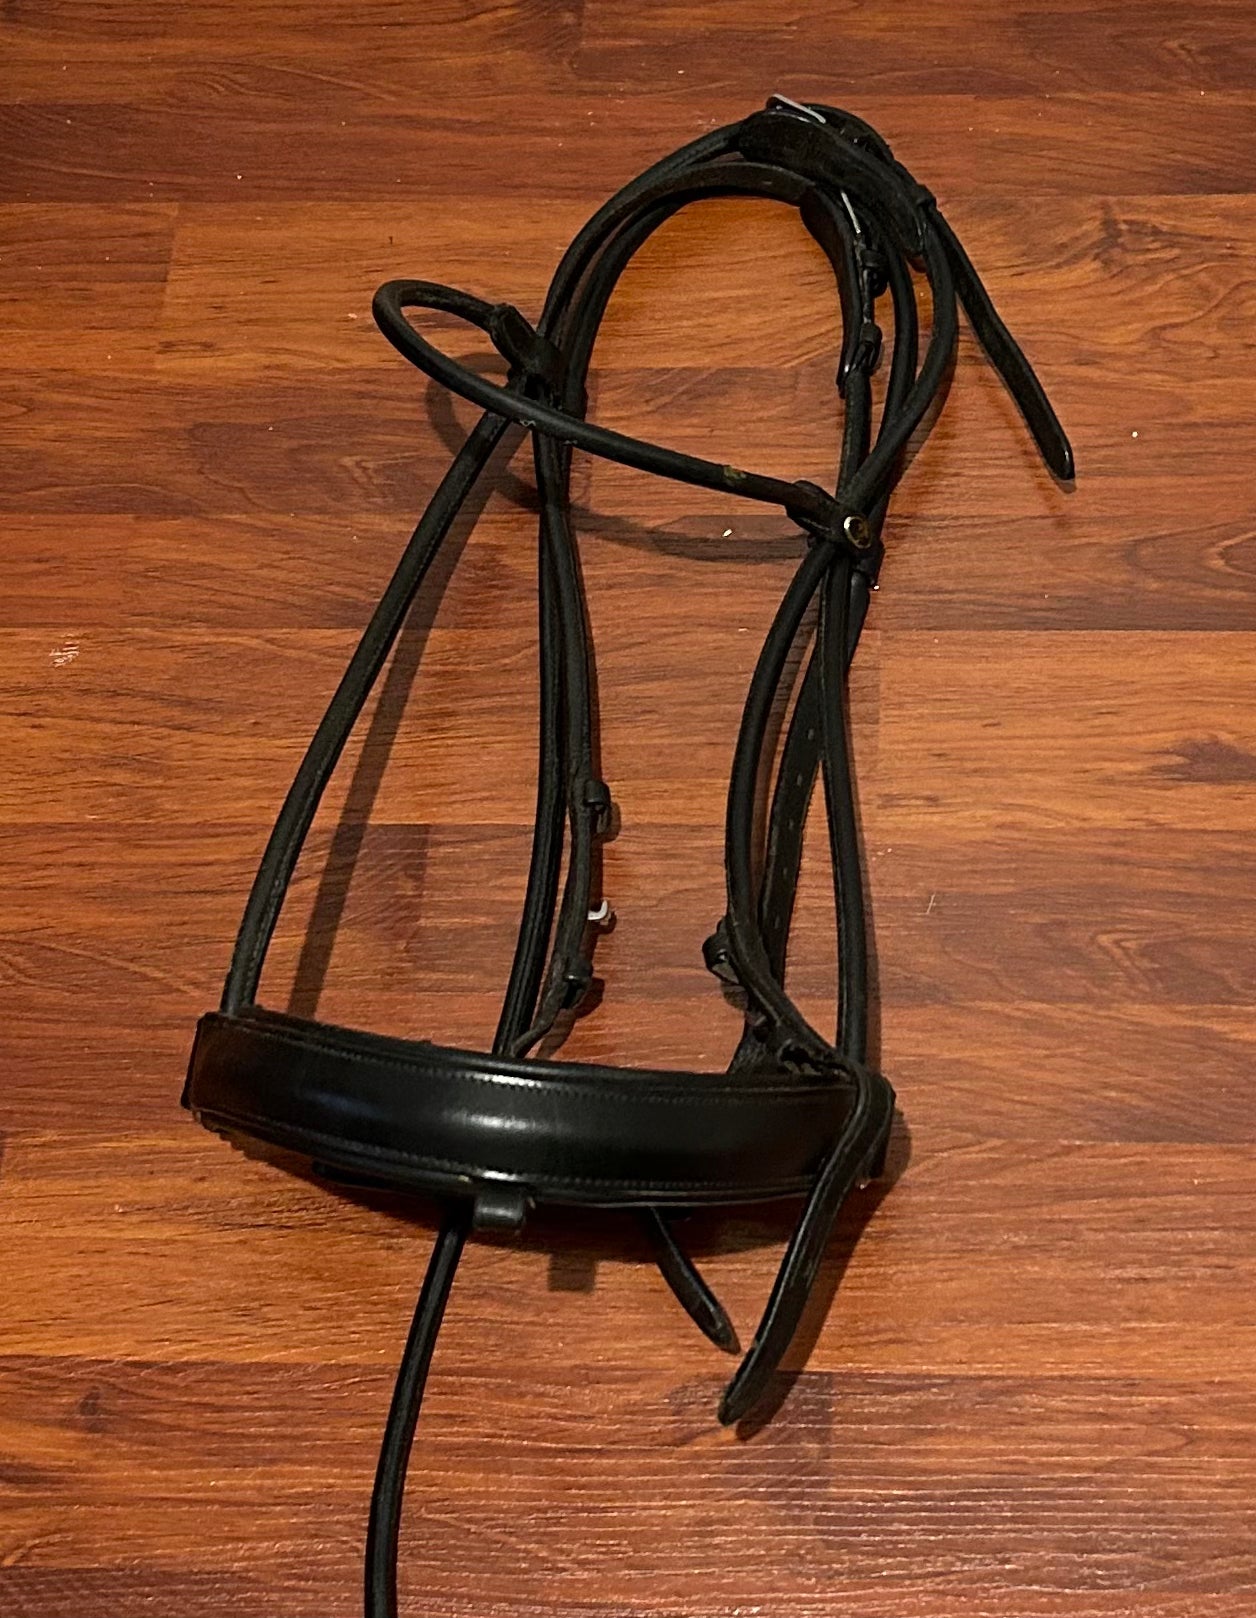 Rolled black snaffle bridle